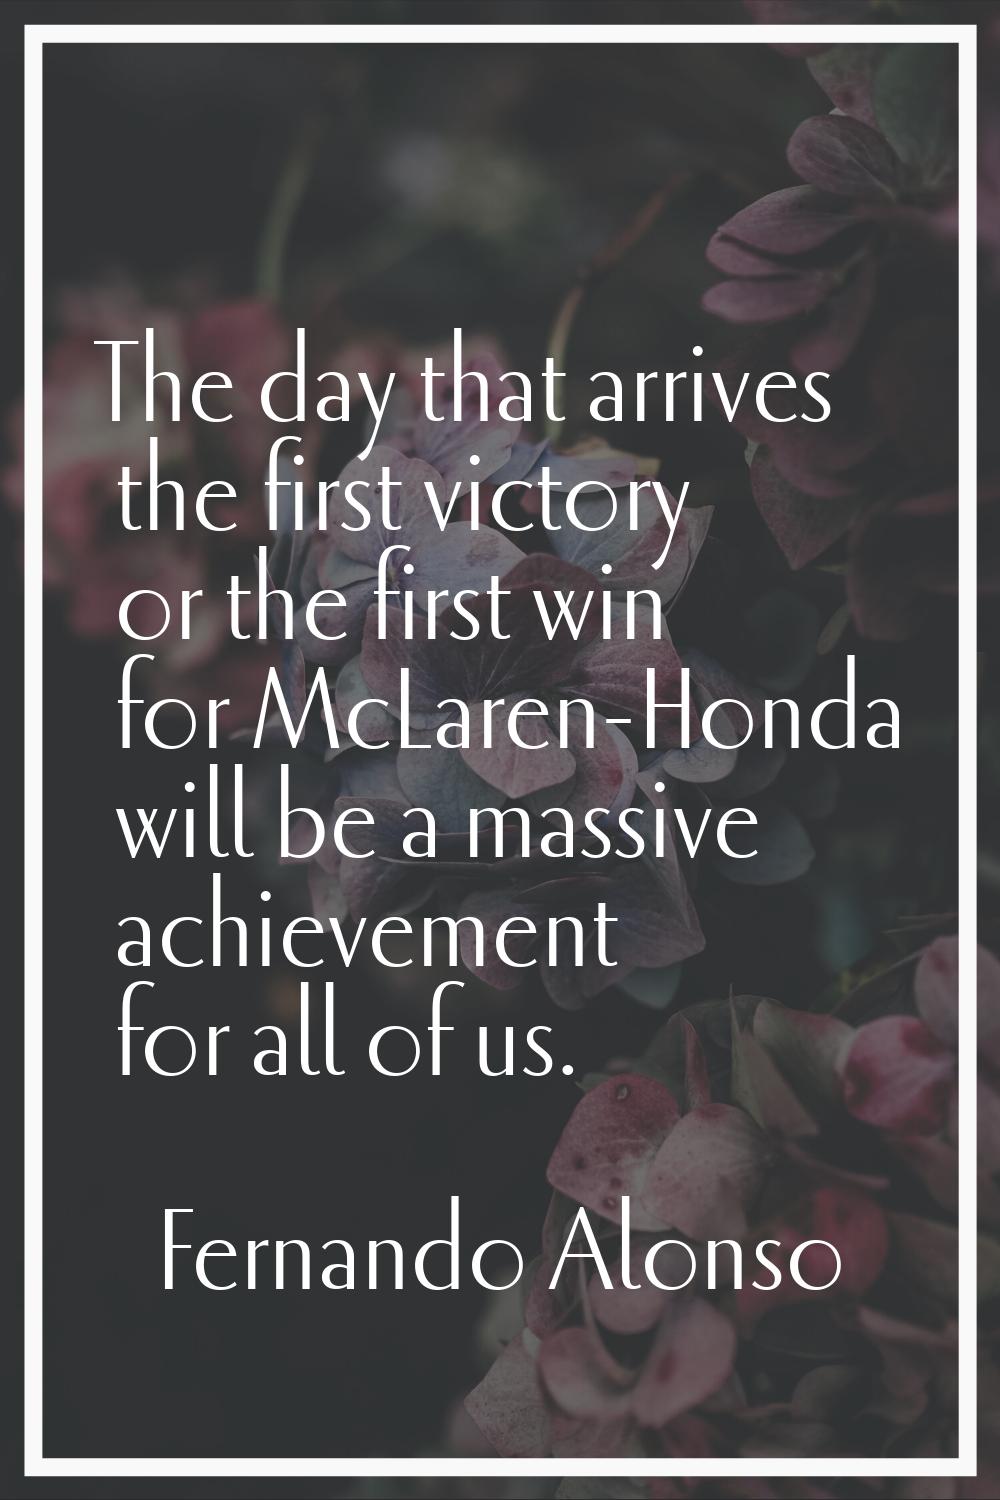 The day that arrives the first victory or the first win for McLaren-Honda will be a massive achieve